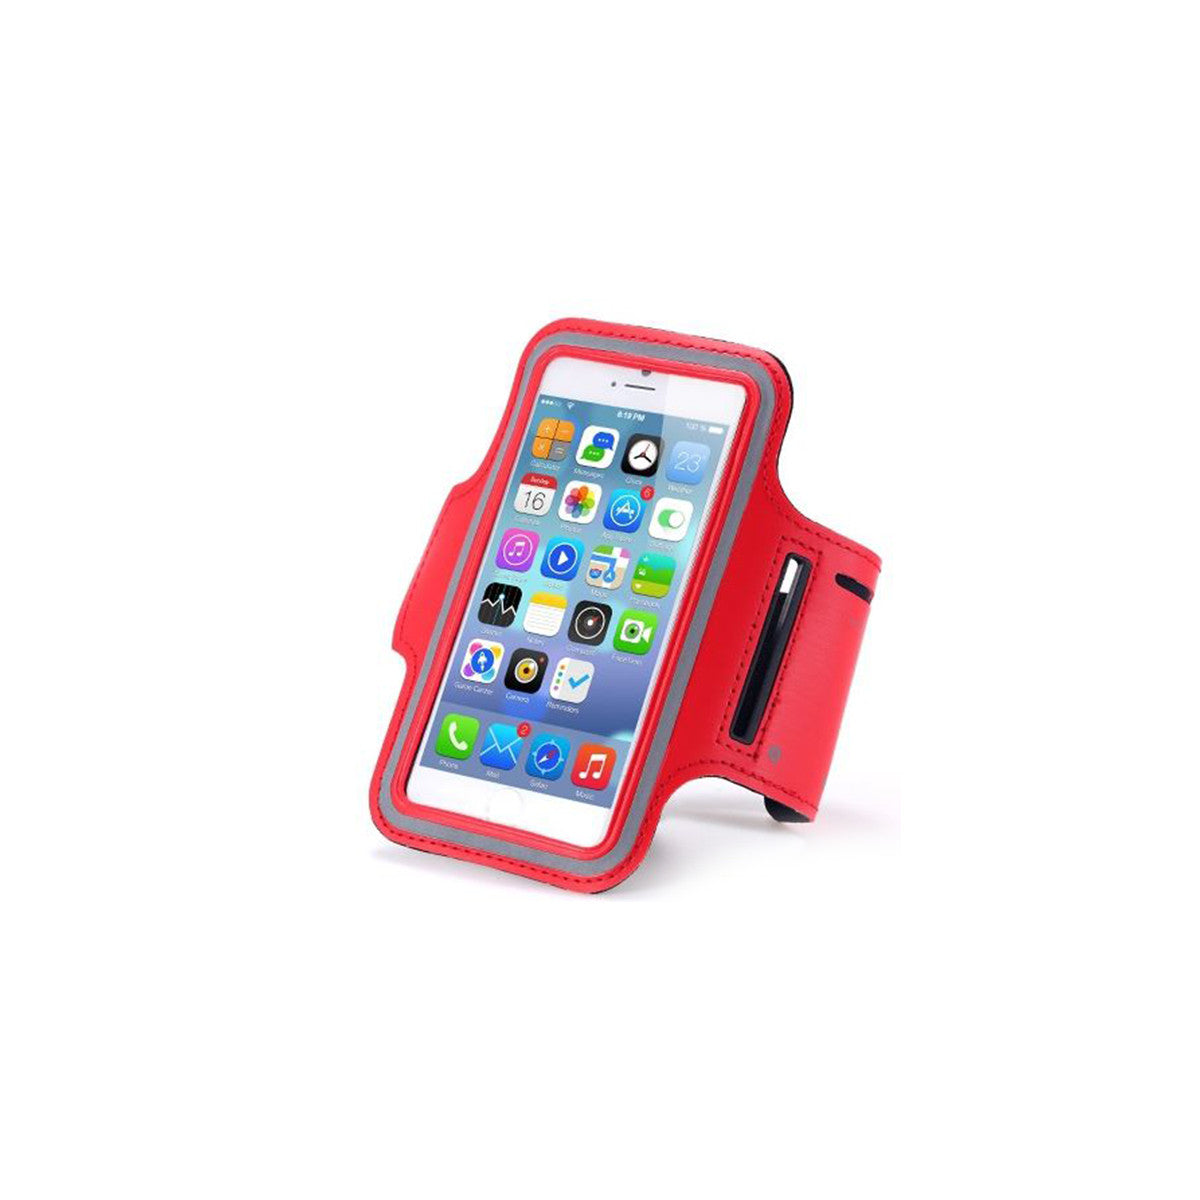 Gym Running Armband For Apple iPhone 5 6 7 & Plus iPhone 5/5S/5C/SE Red 